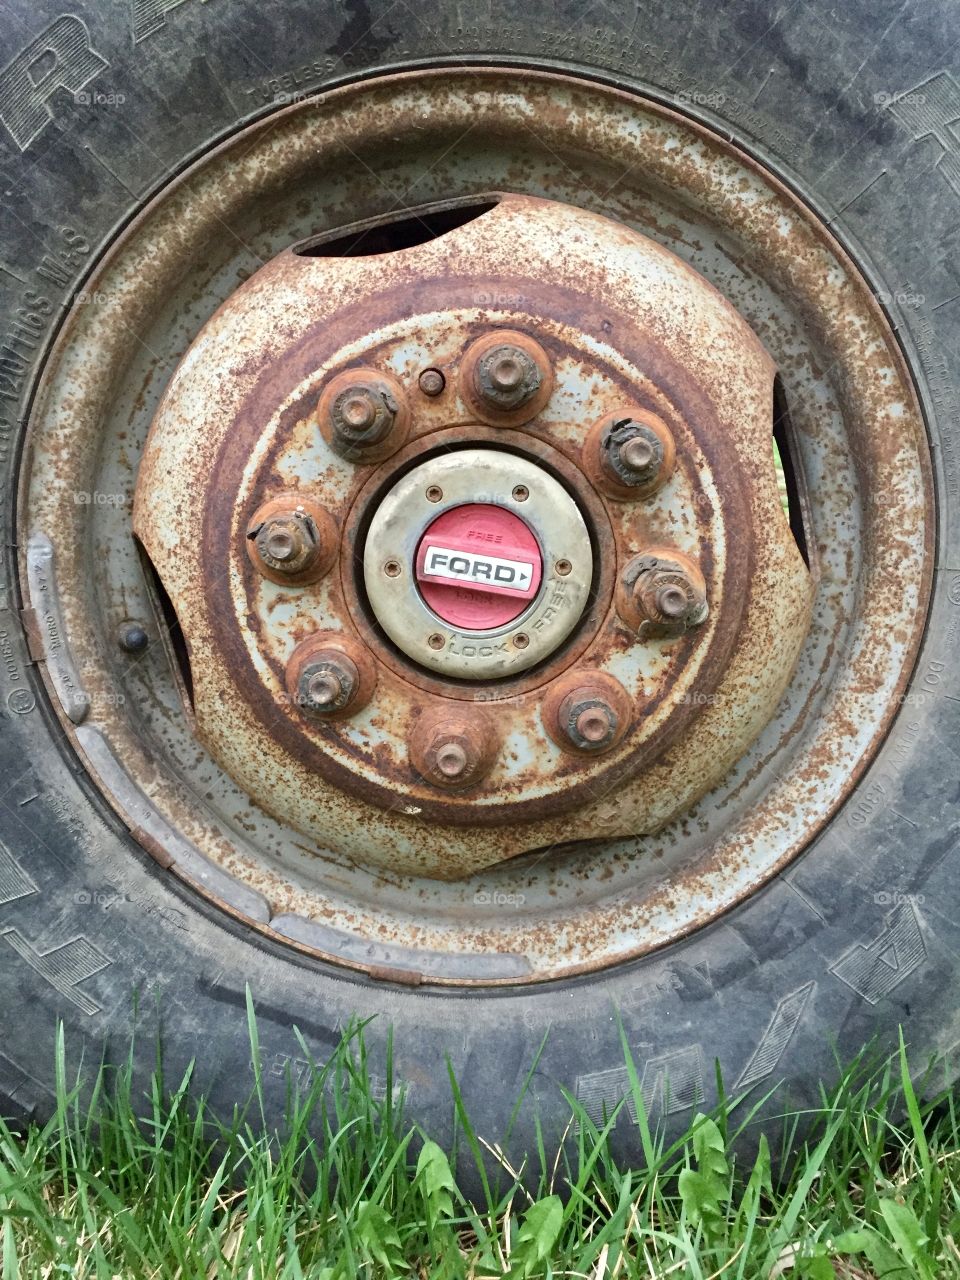 A truck tire with rusted wheel rim and bolts